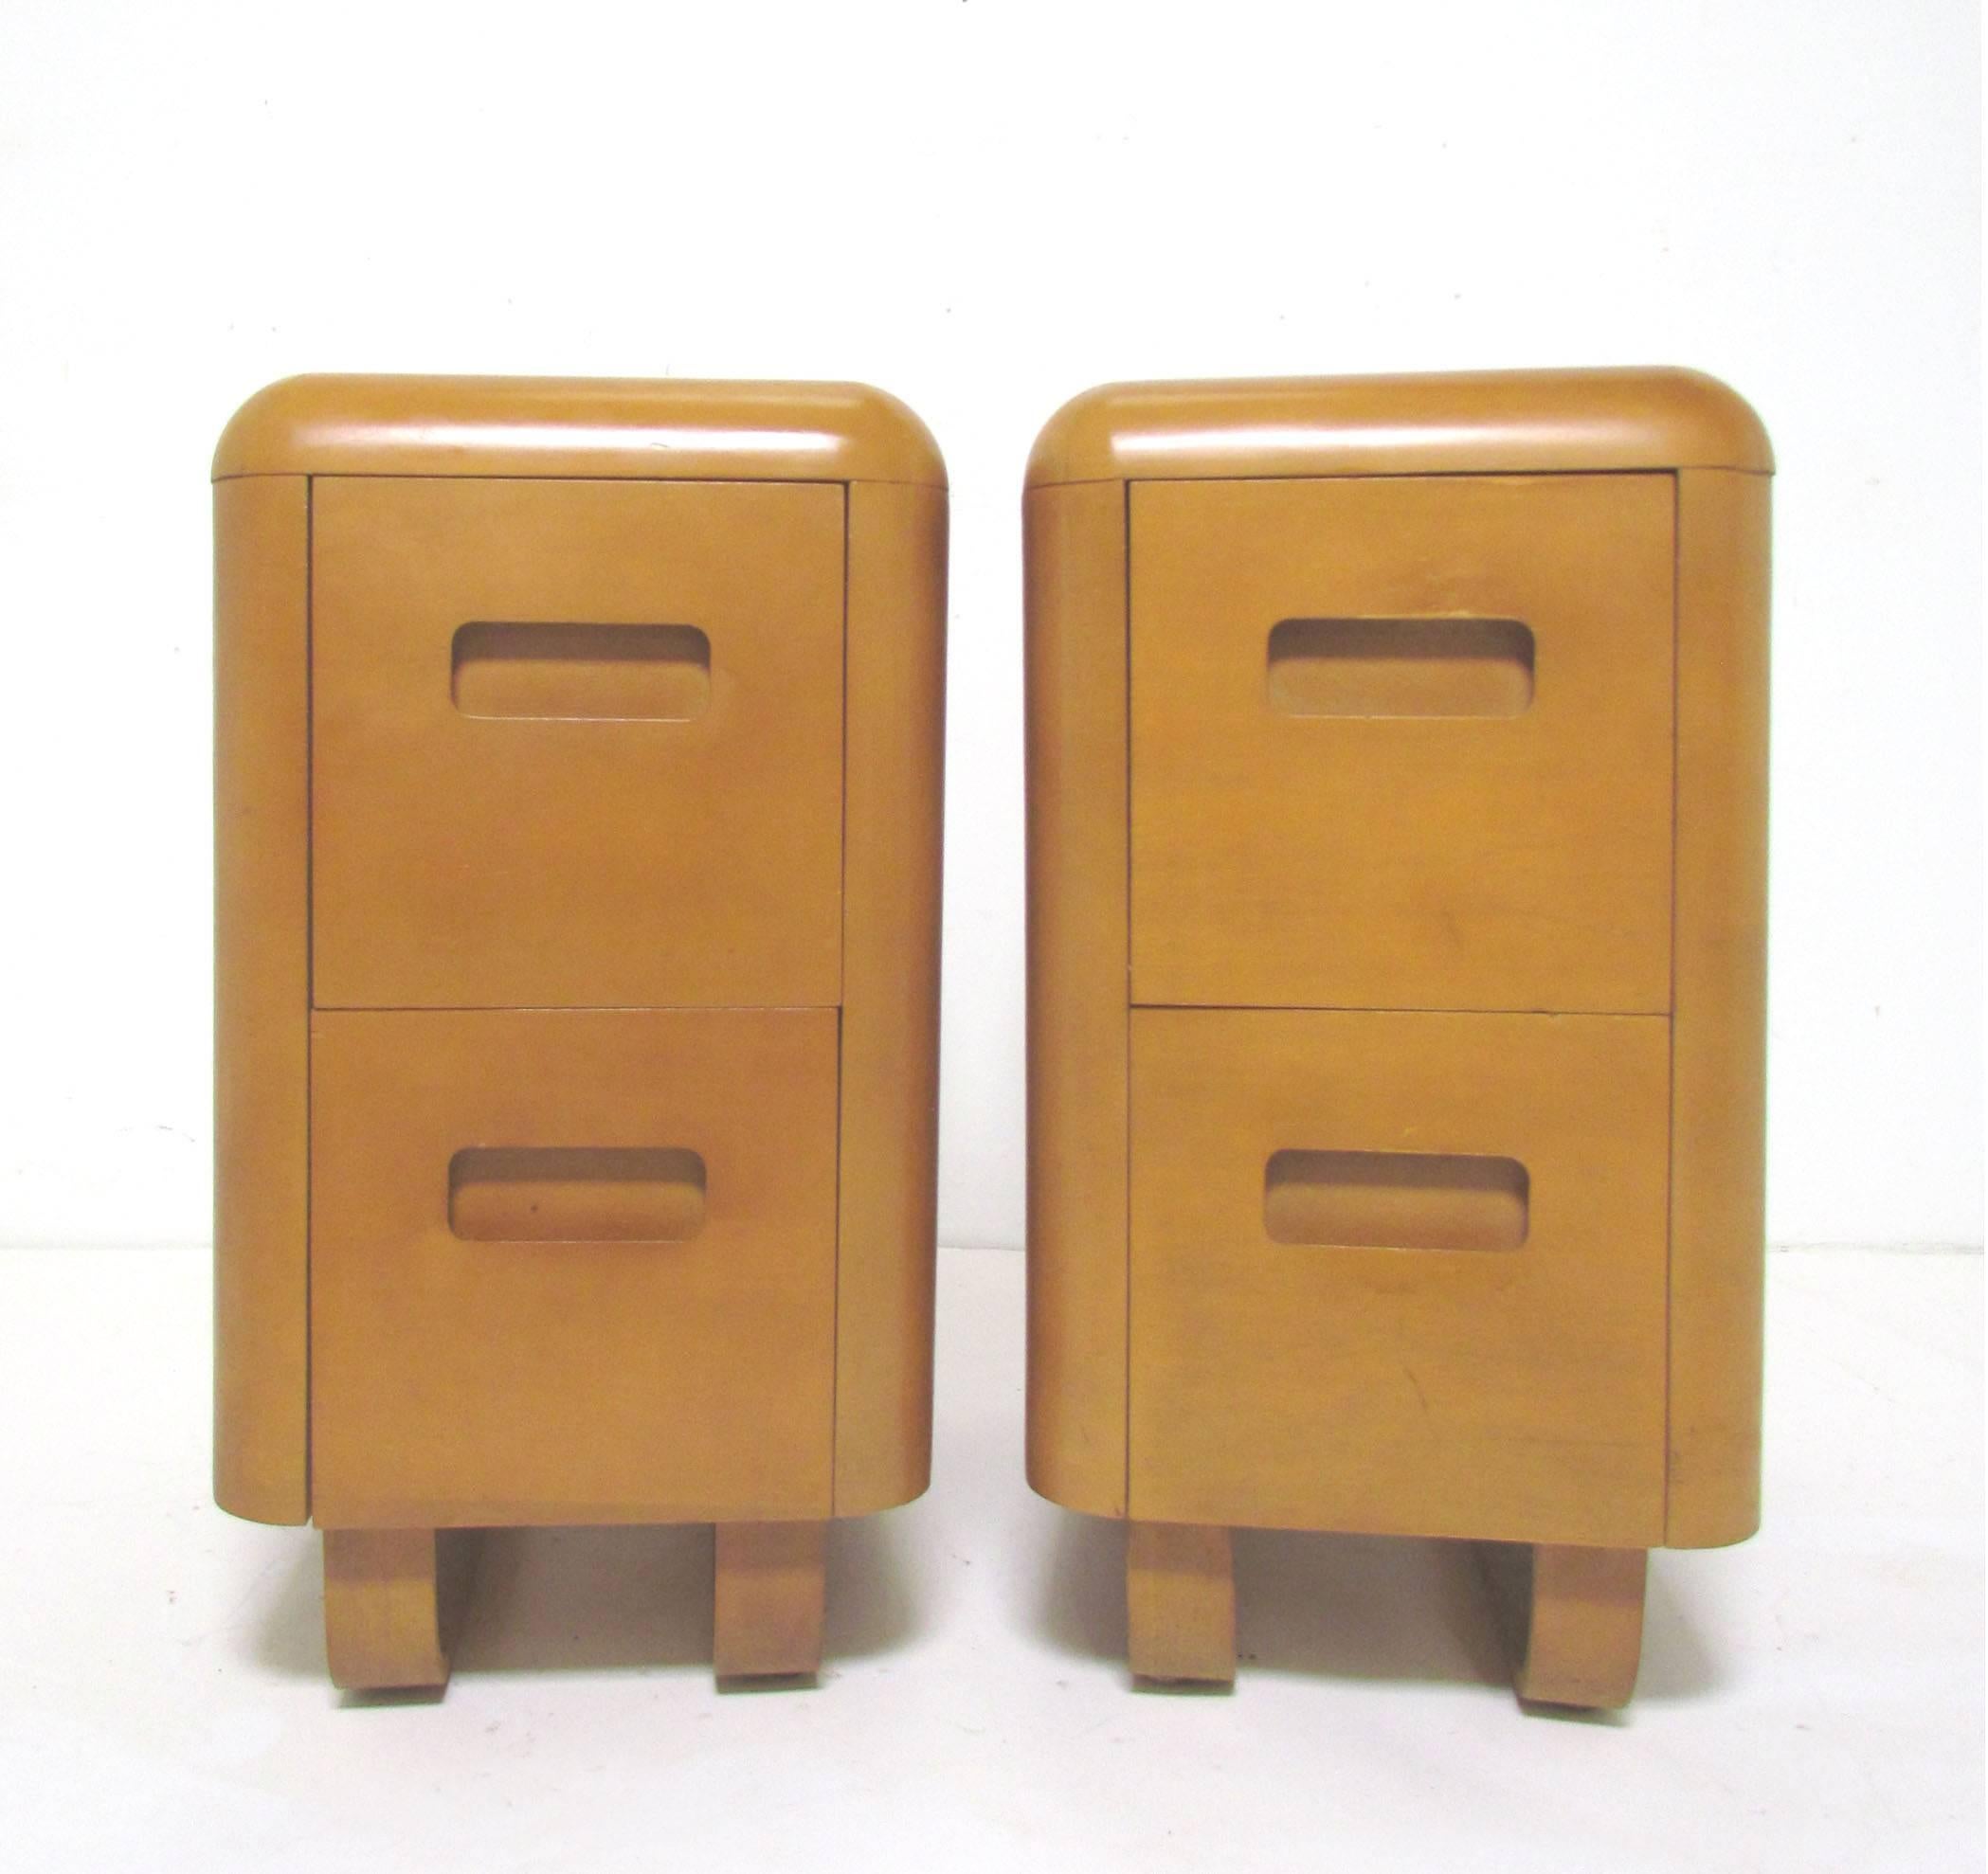 Pair of nightstands from the Plymodern line by Paul Goldman for his short lived post war company Plymold Corp., circa 1940s, in the original 